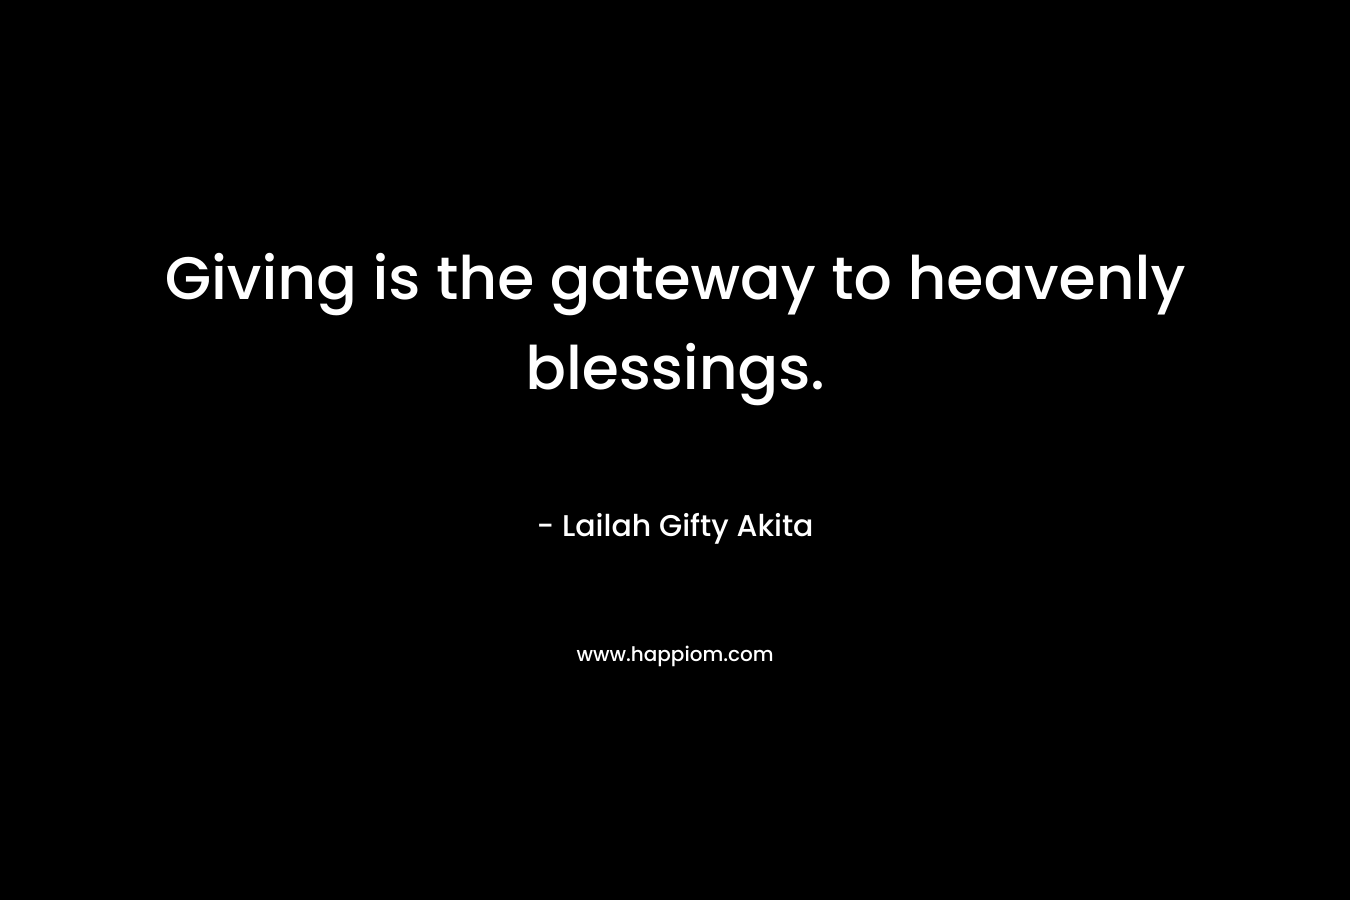 Giving is the gateway to heavenly blessings.